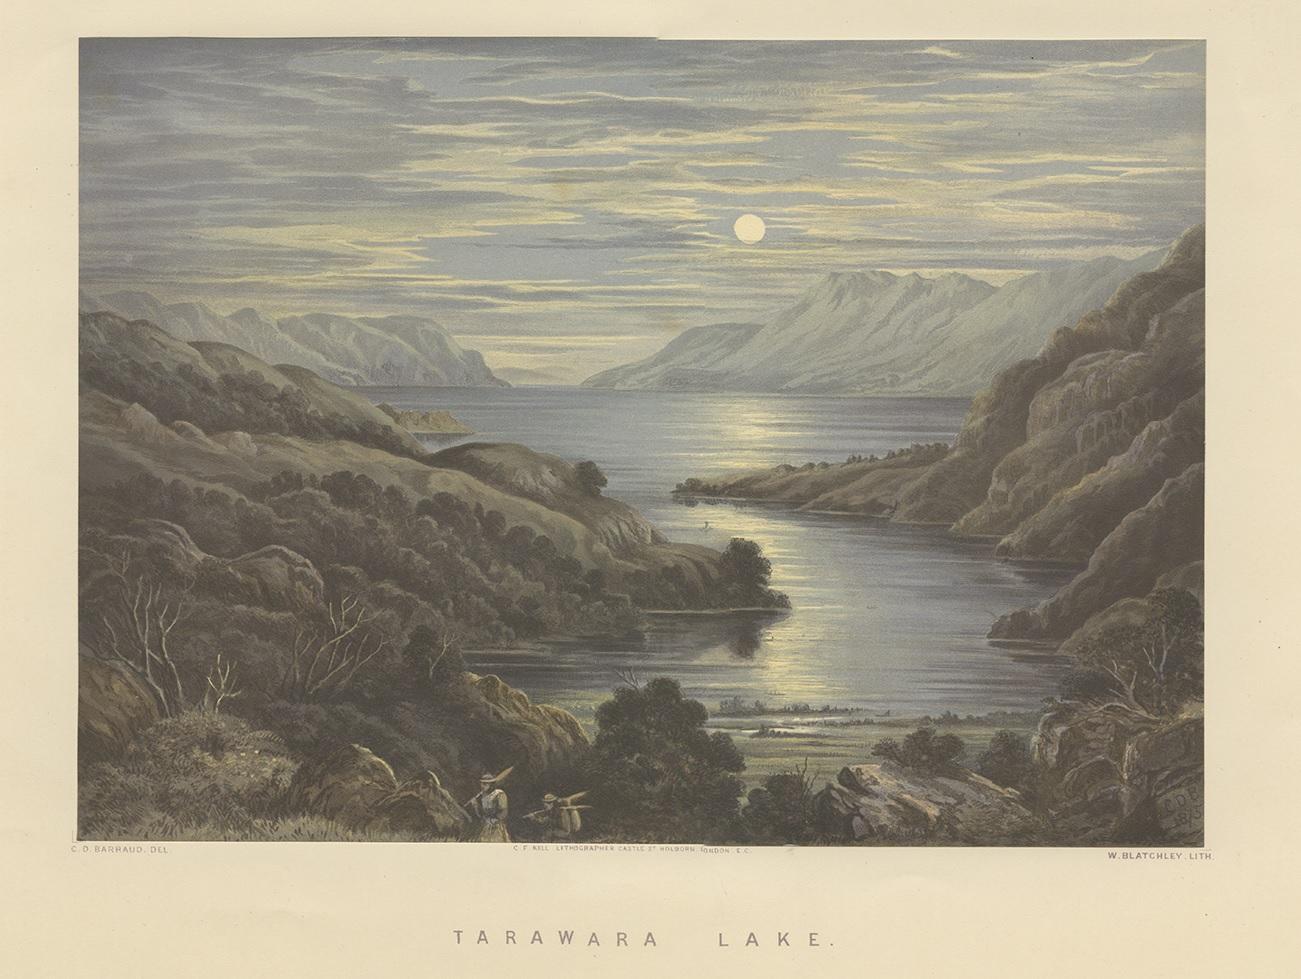 Antique print titled 'Tarawara Lake'. View of Lake Tarawera, the largest of a series of lakes which surround the volcano Mount Tarawera in the North Island of New Zealand. Lithographed by W. Blatchley after a drawing by Barraud. This print